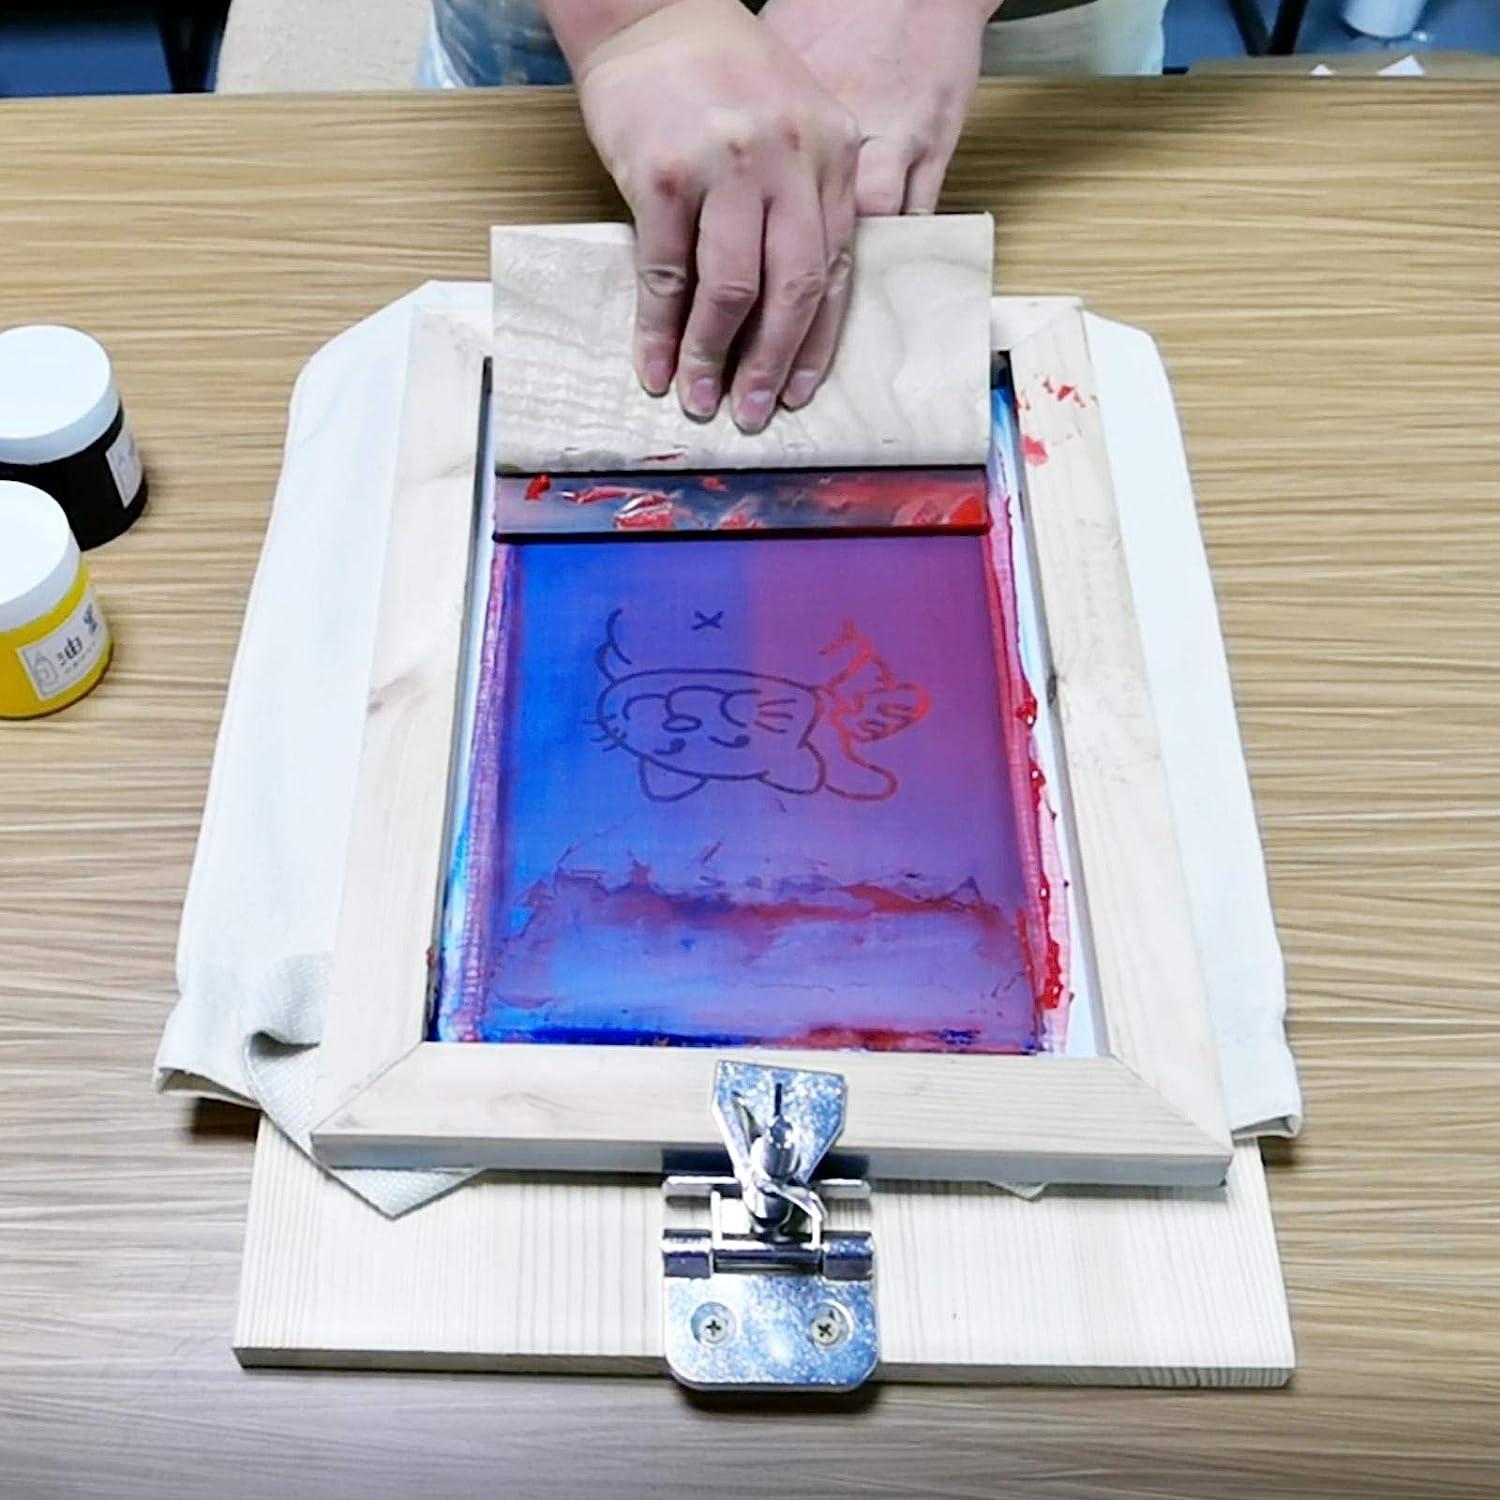 Large variety of screen printing ink and supplies